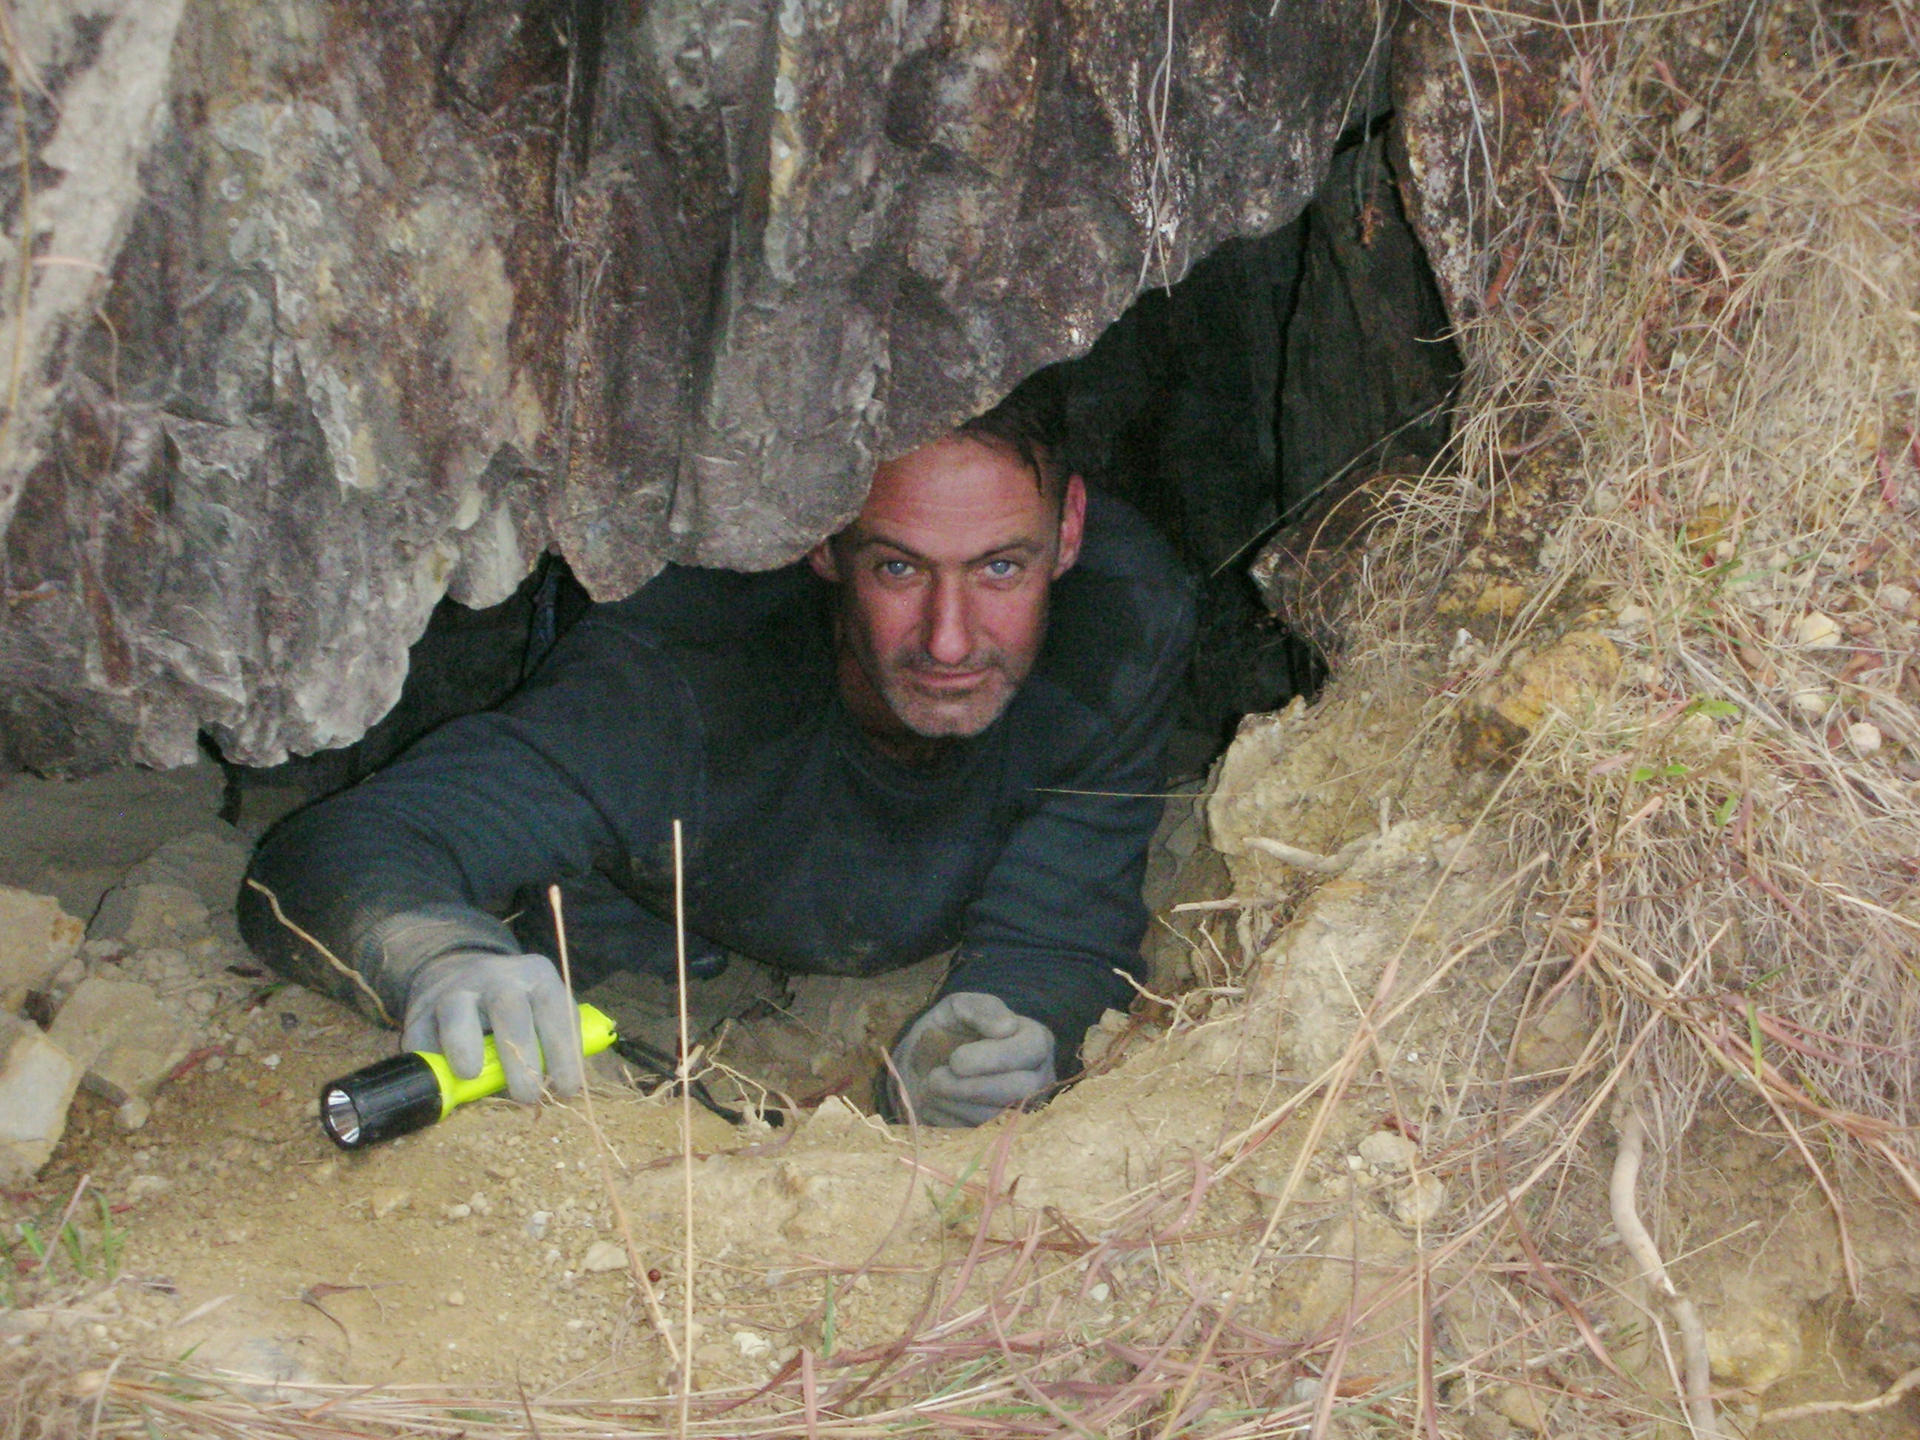 David Willott searching for relics in a cave. Photo: Red Door News